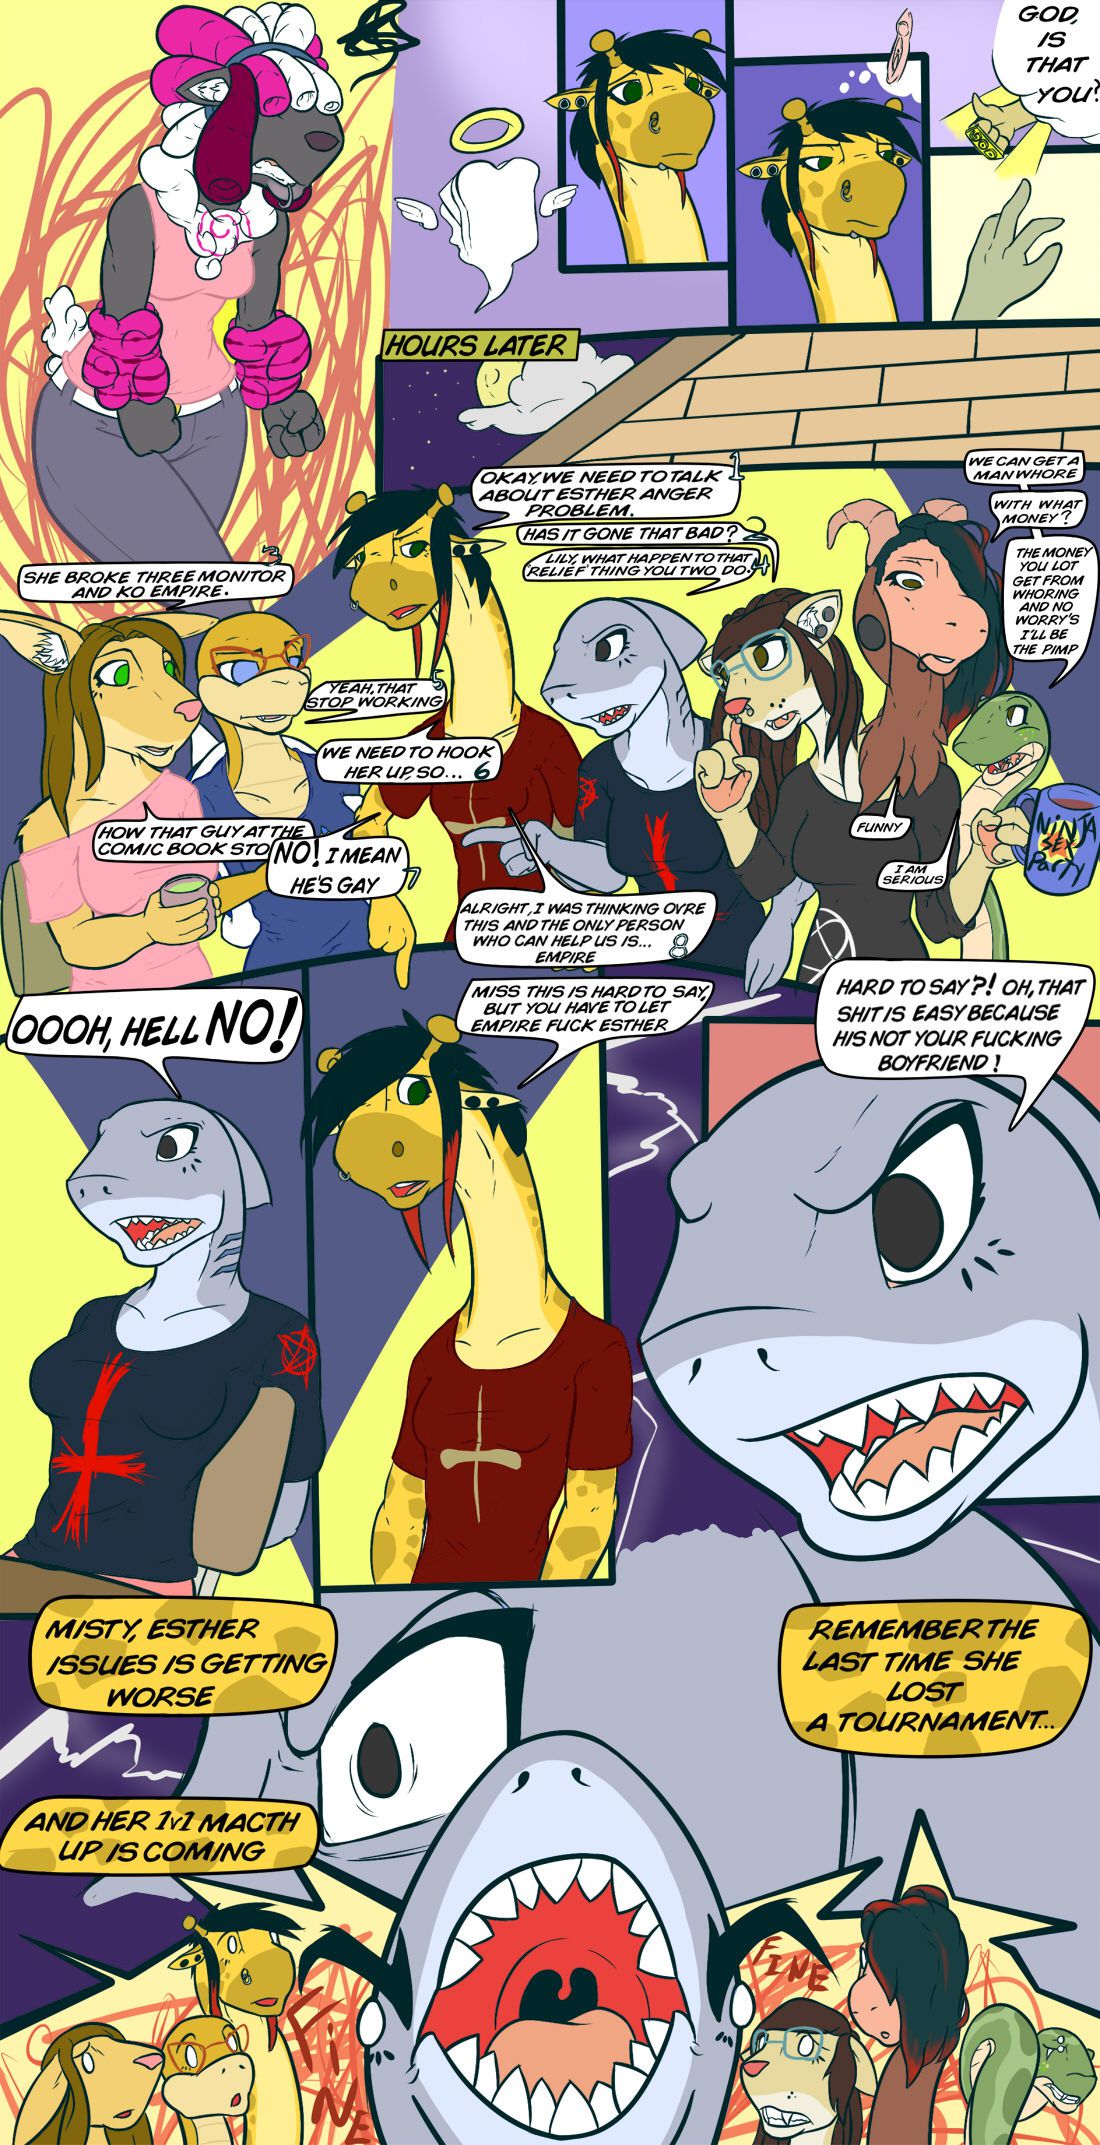 [DR-EmpireZombie] Anger Management (ongoing) 3